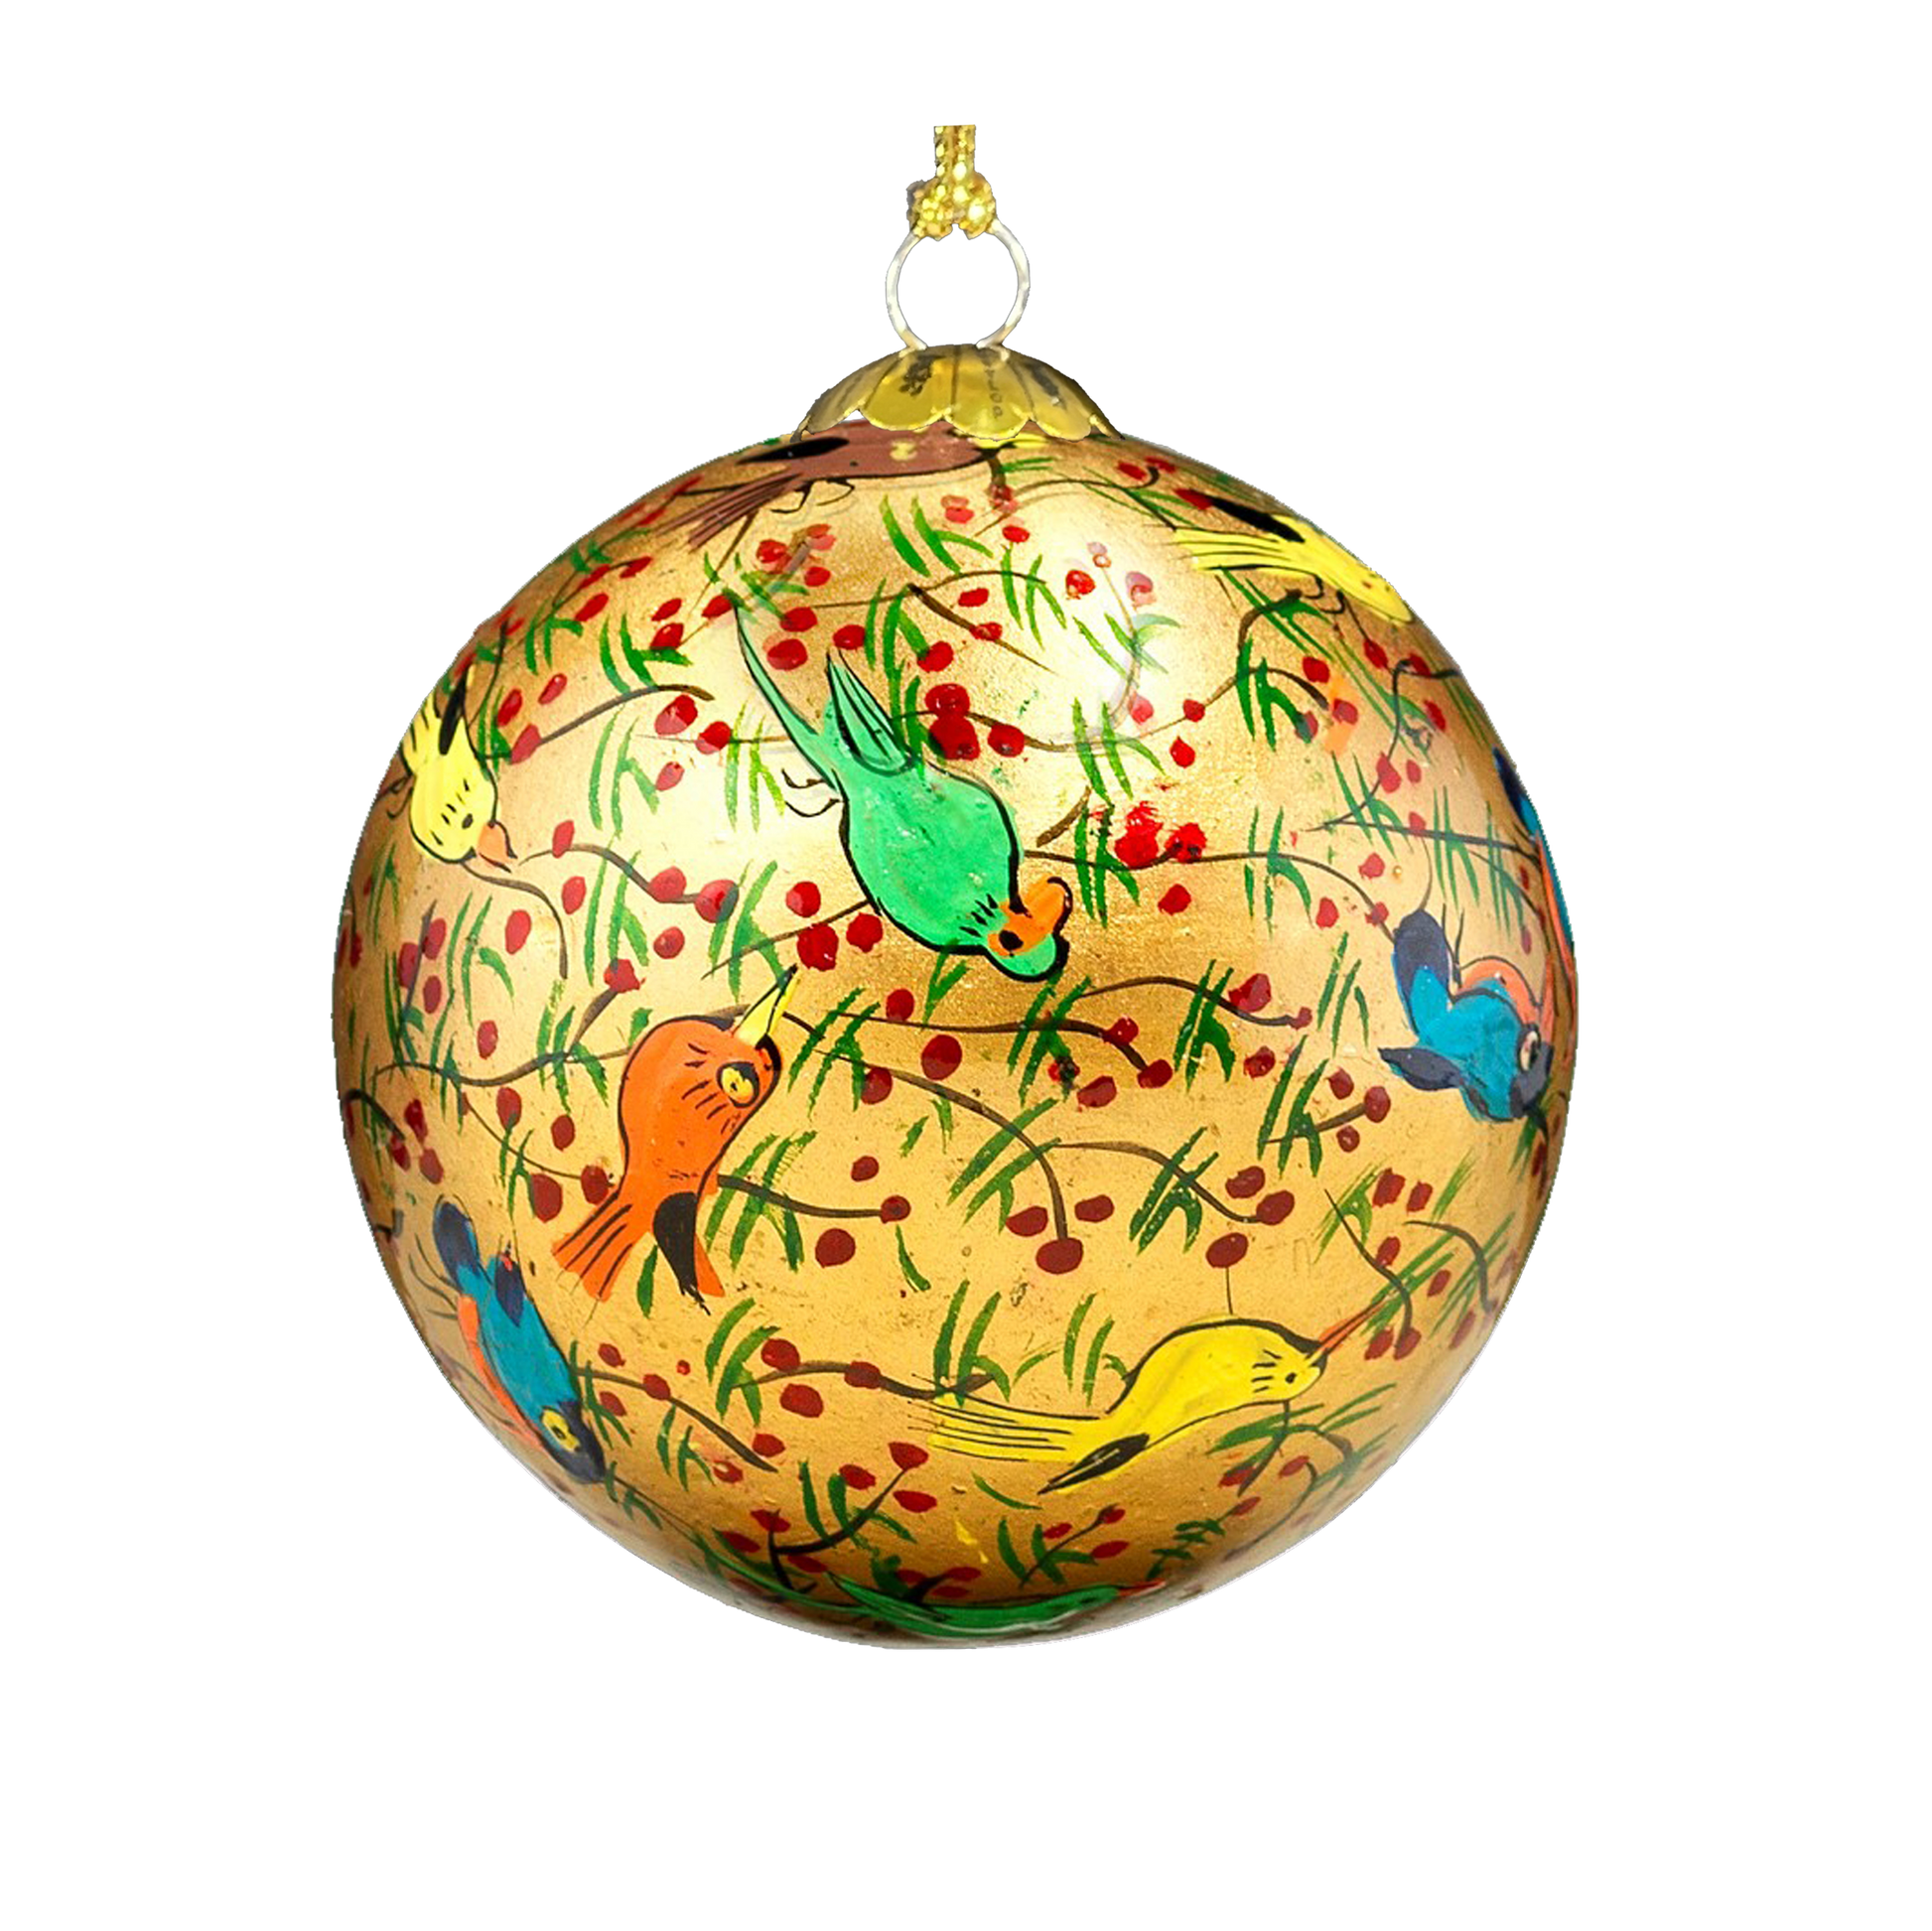 BirdsChristmas Bauble for Christmas tree decorations